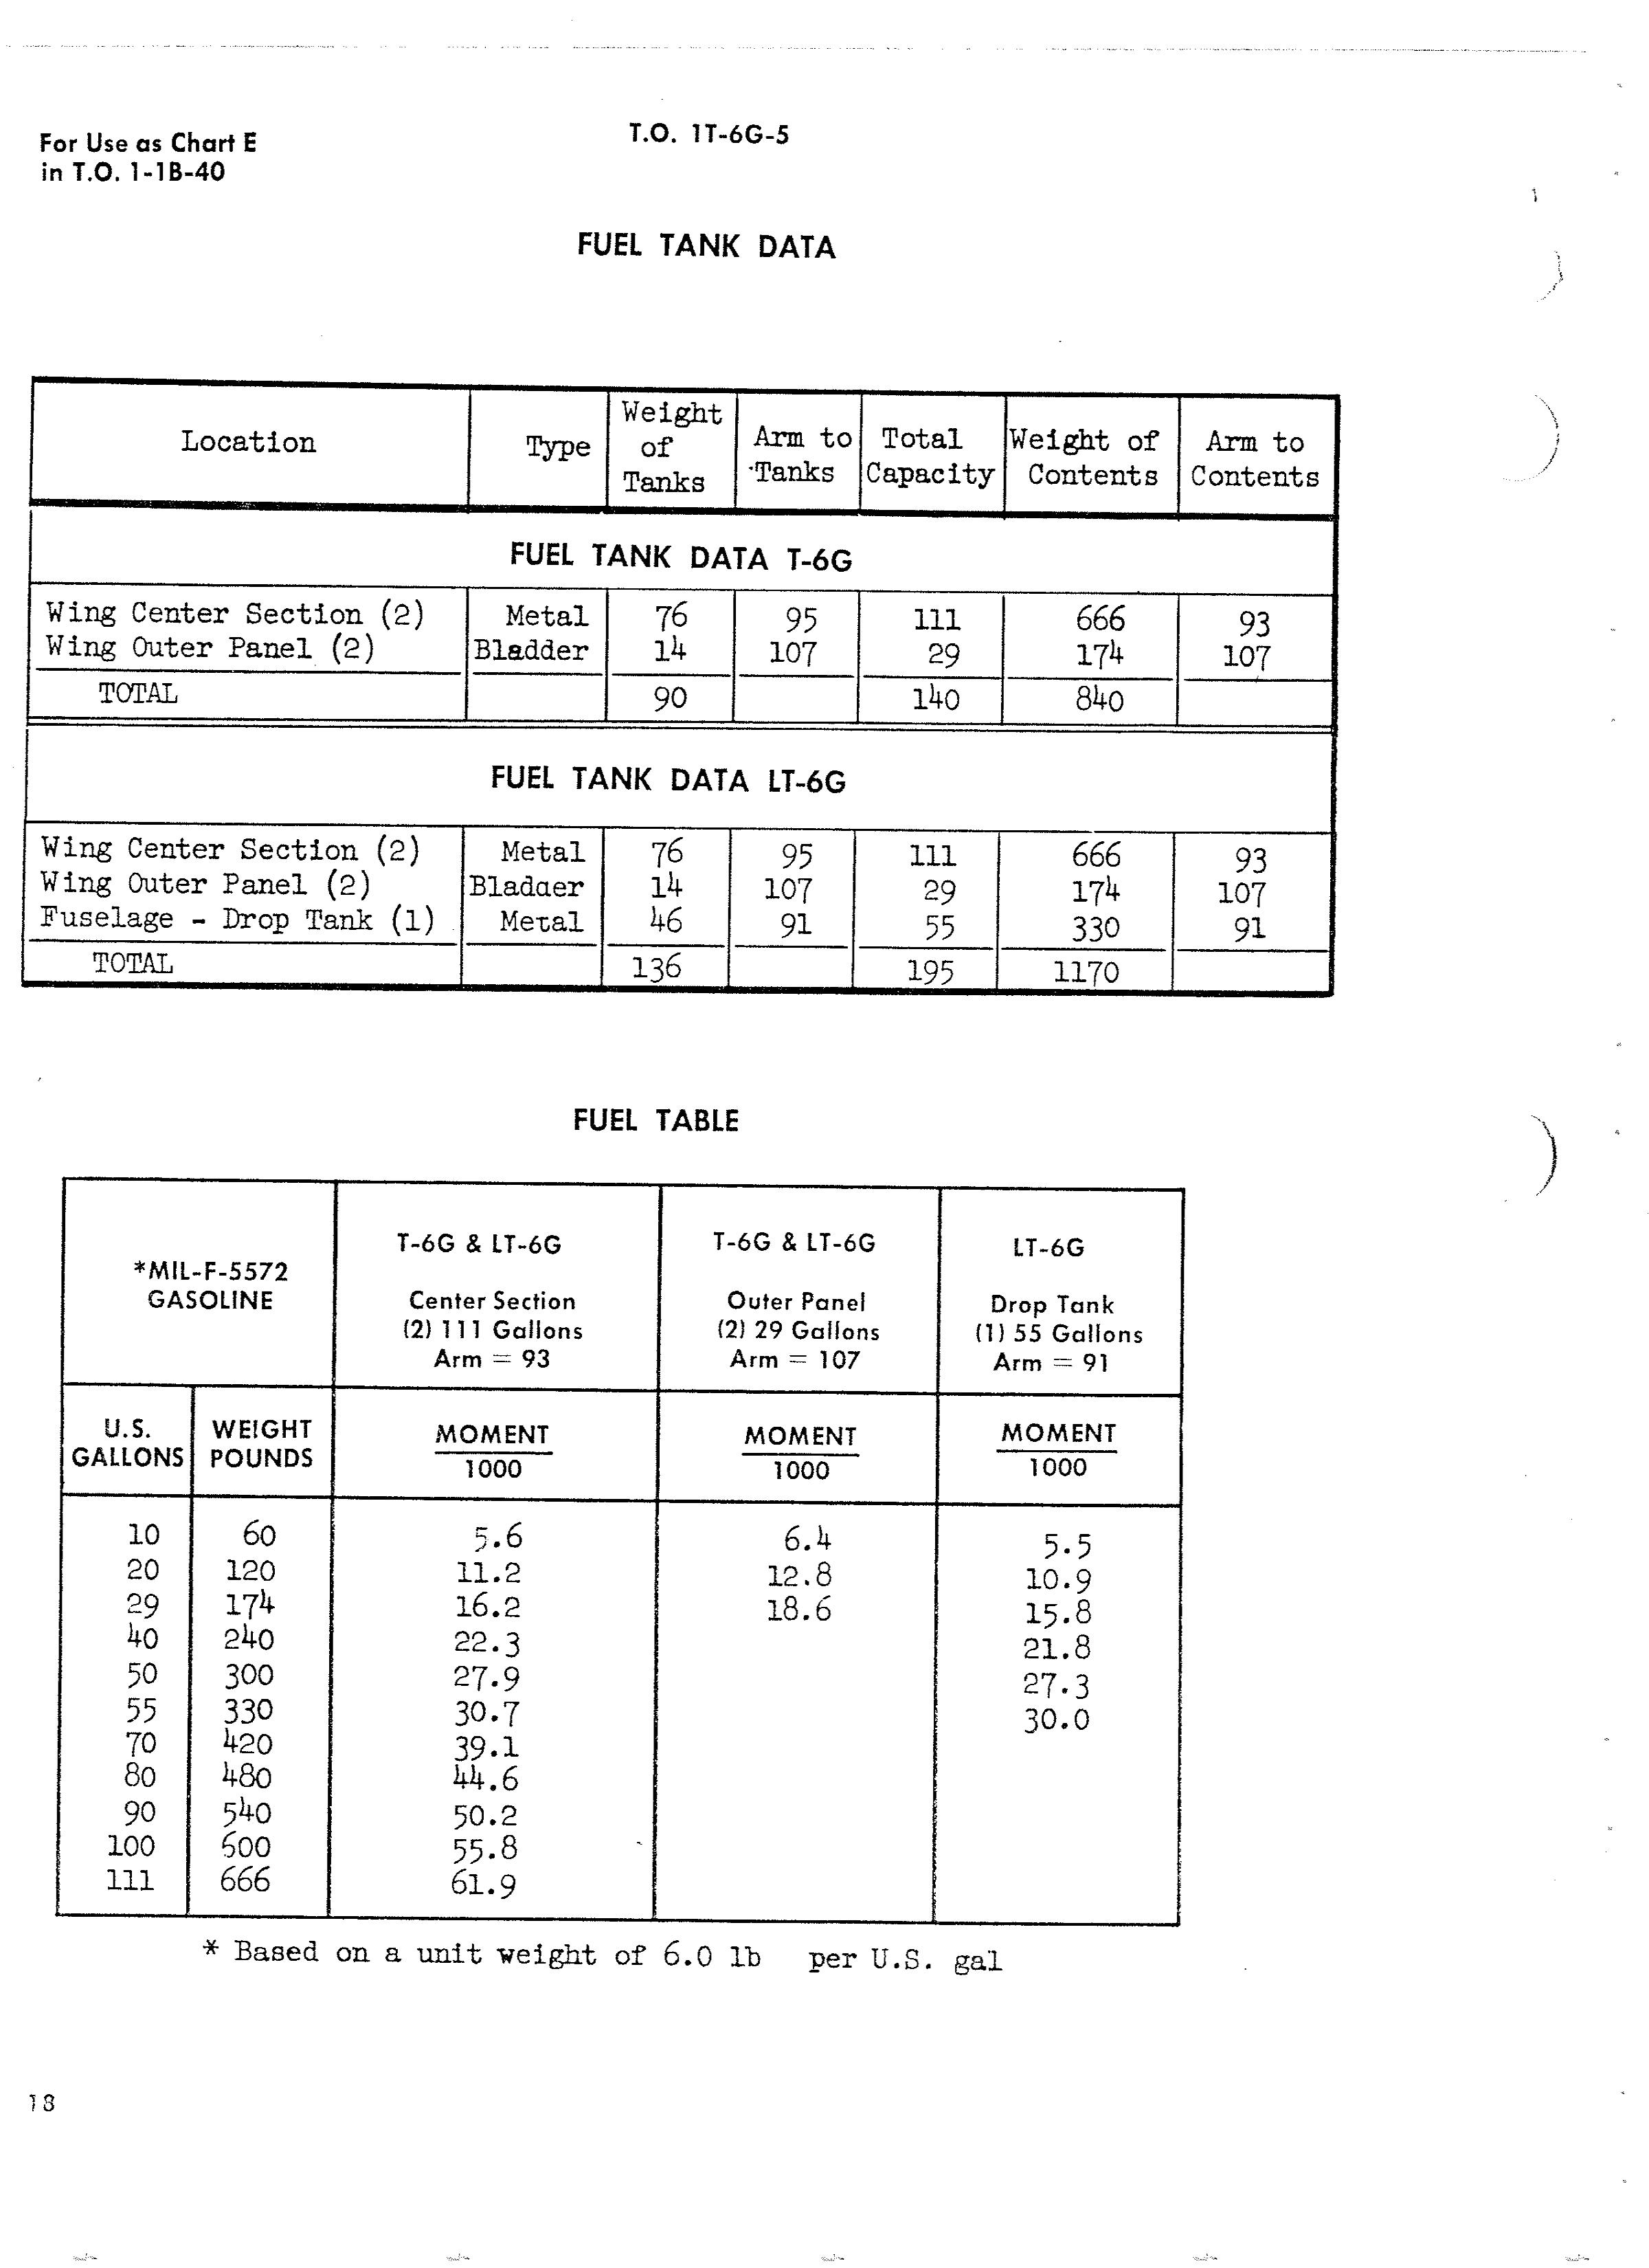 Sample page 20 from AirCorps Library document: Basic Weight Check List and Loading Data - AT-6